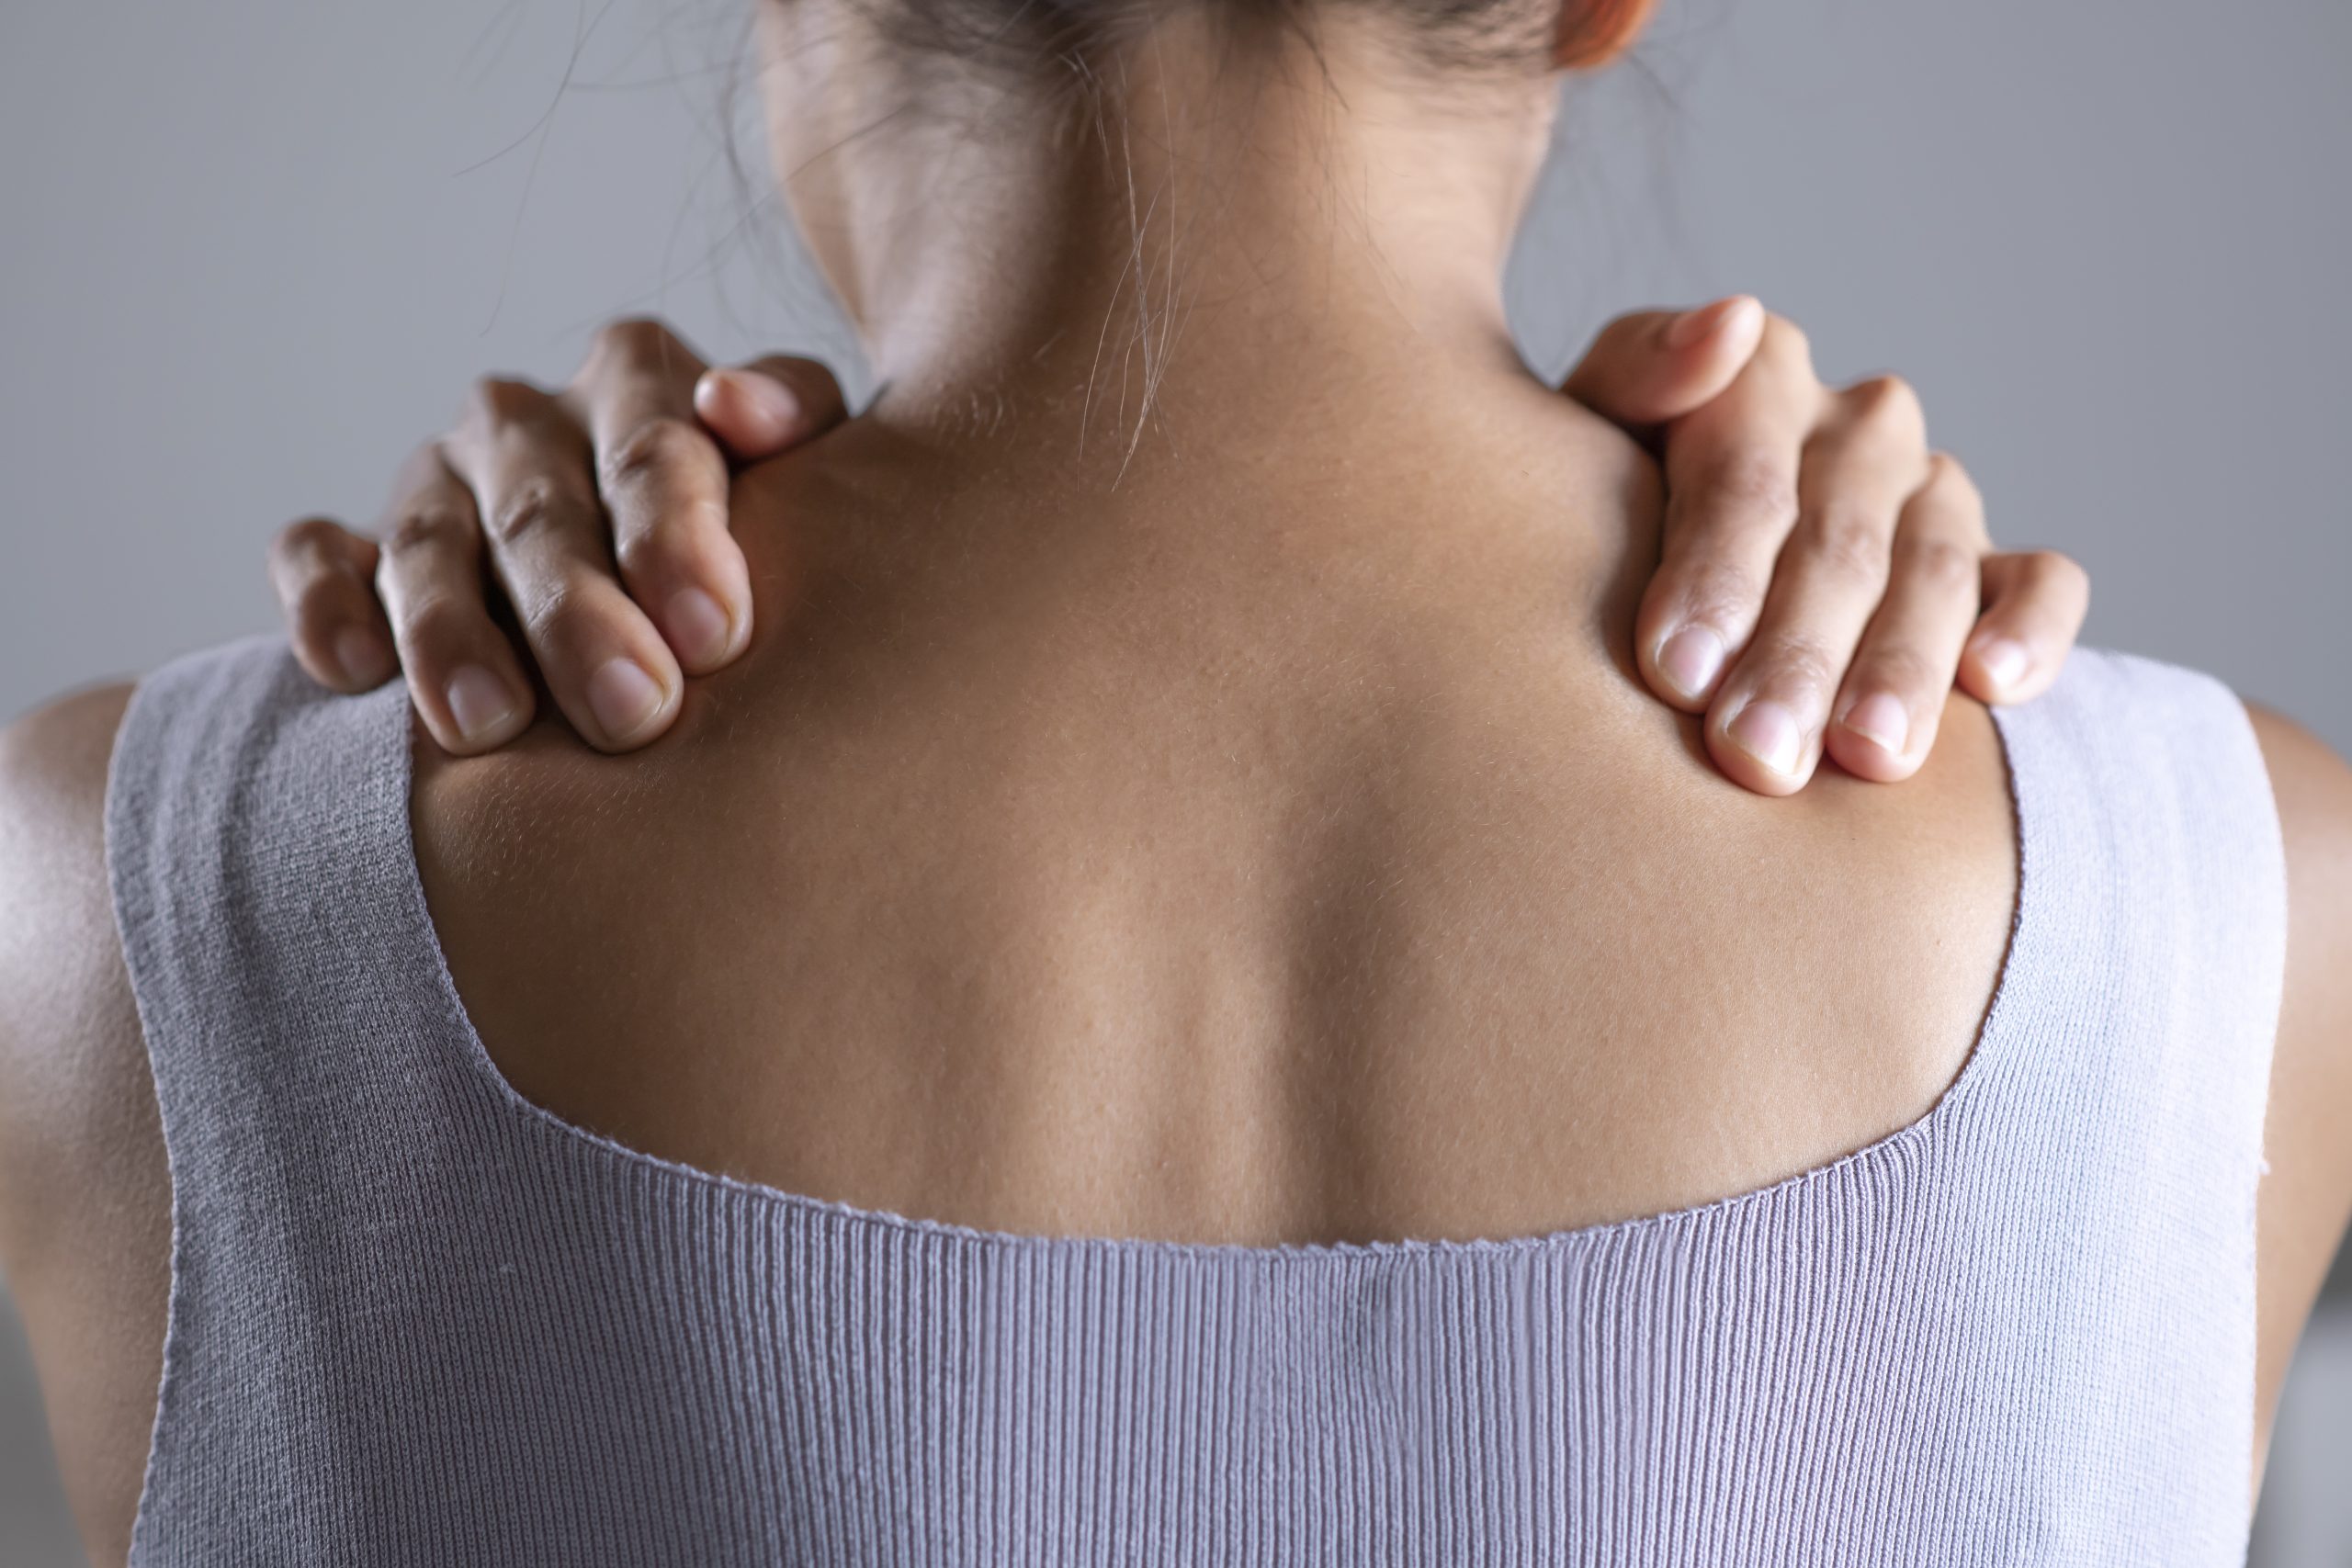 Relieve Shoulder Pain with Medical Massage RX in the Comfort of Your LA Home